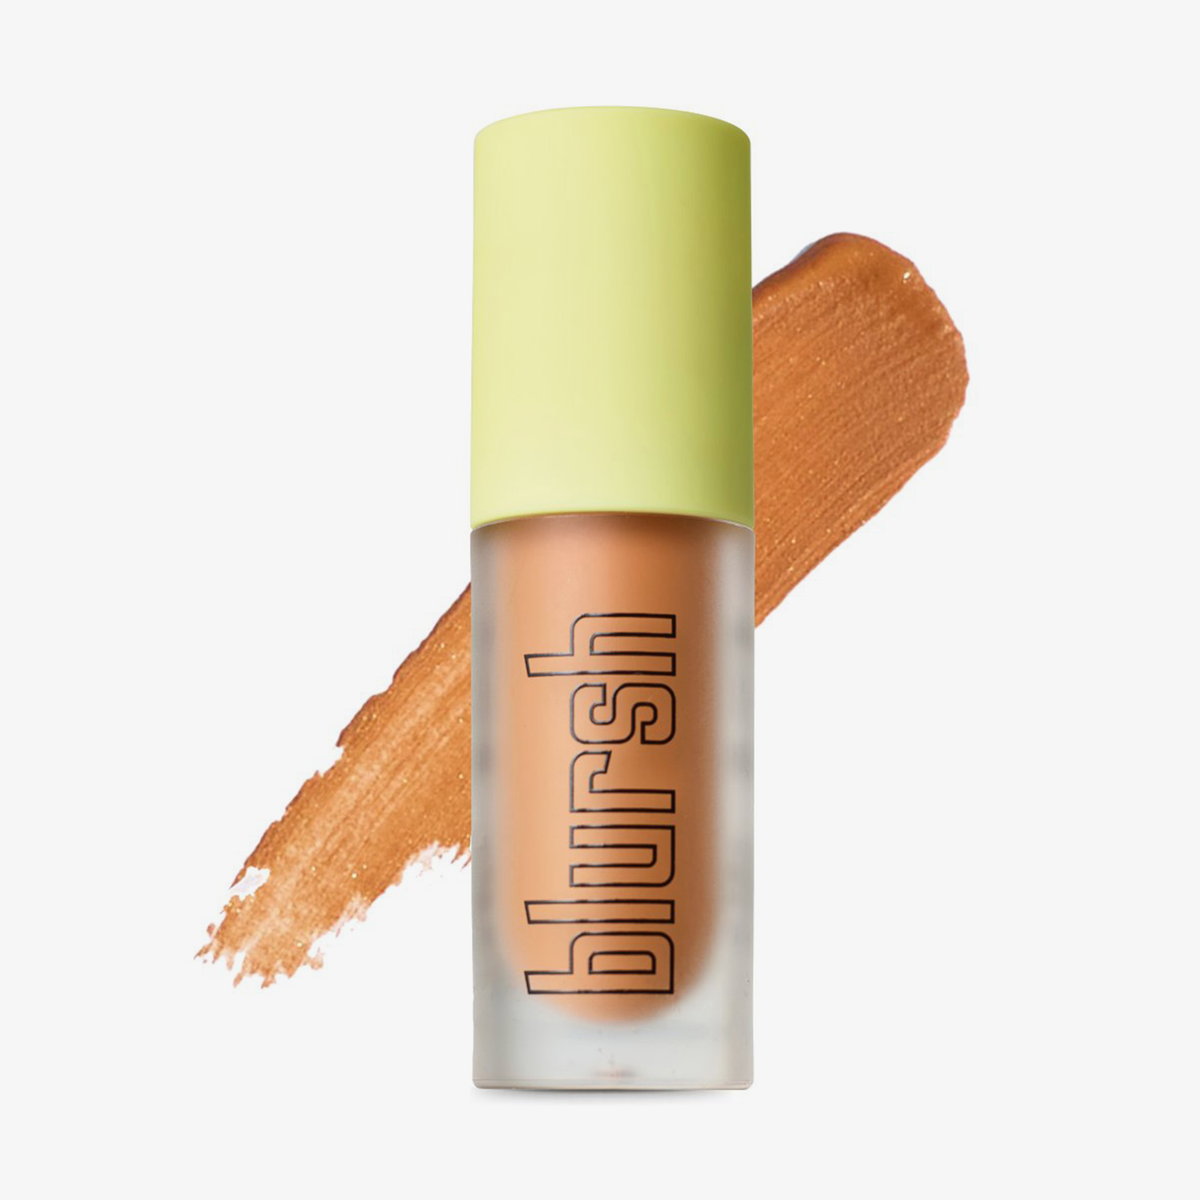 Made By Mitchell | Blursh Bronzed Creme Carve